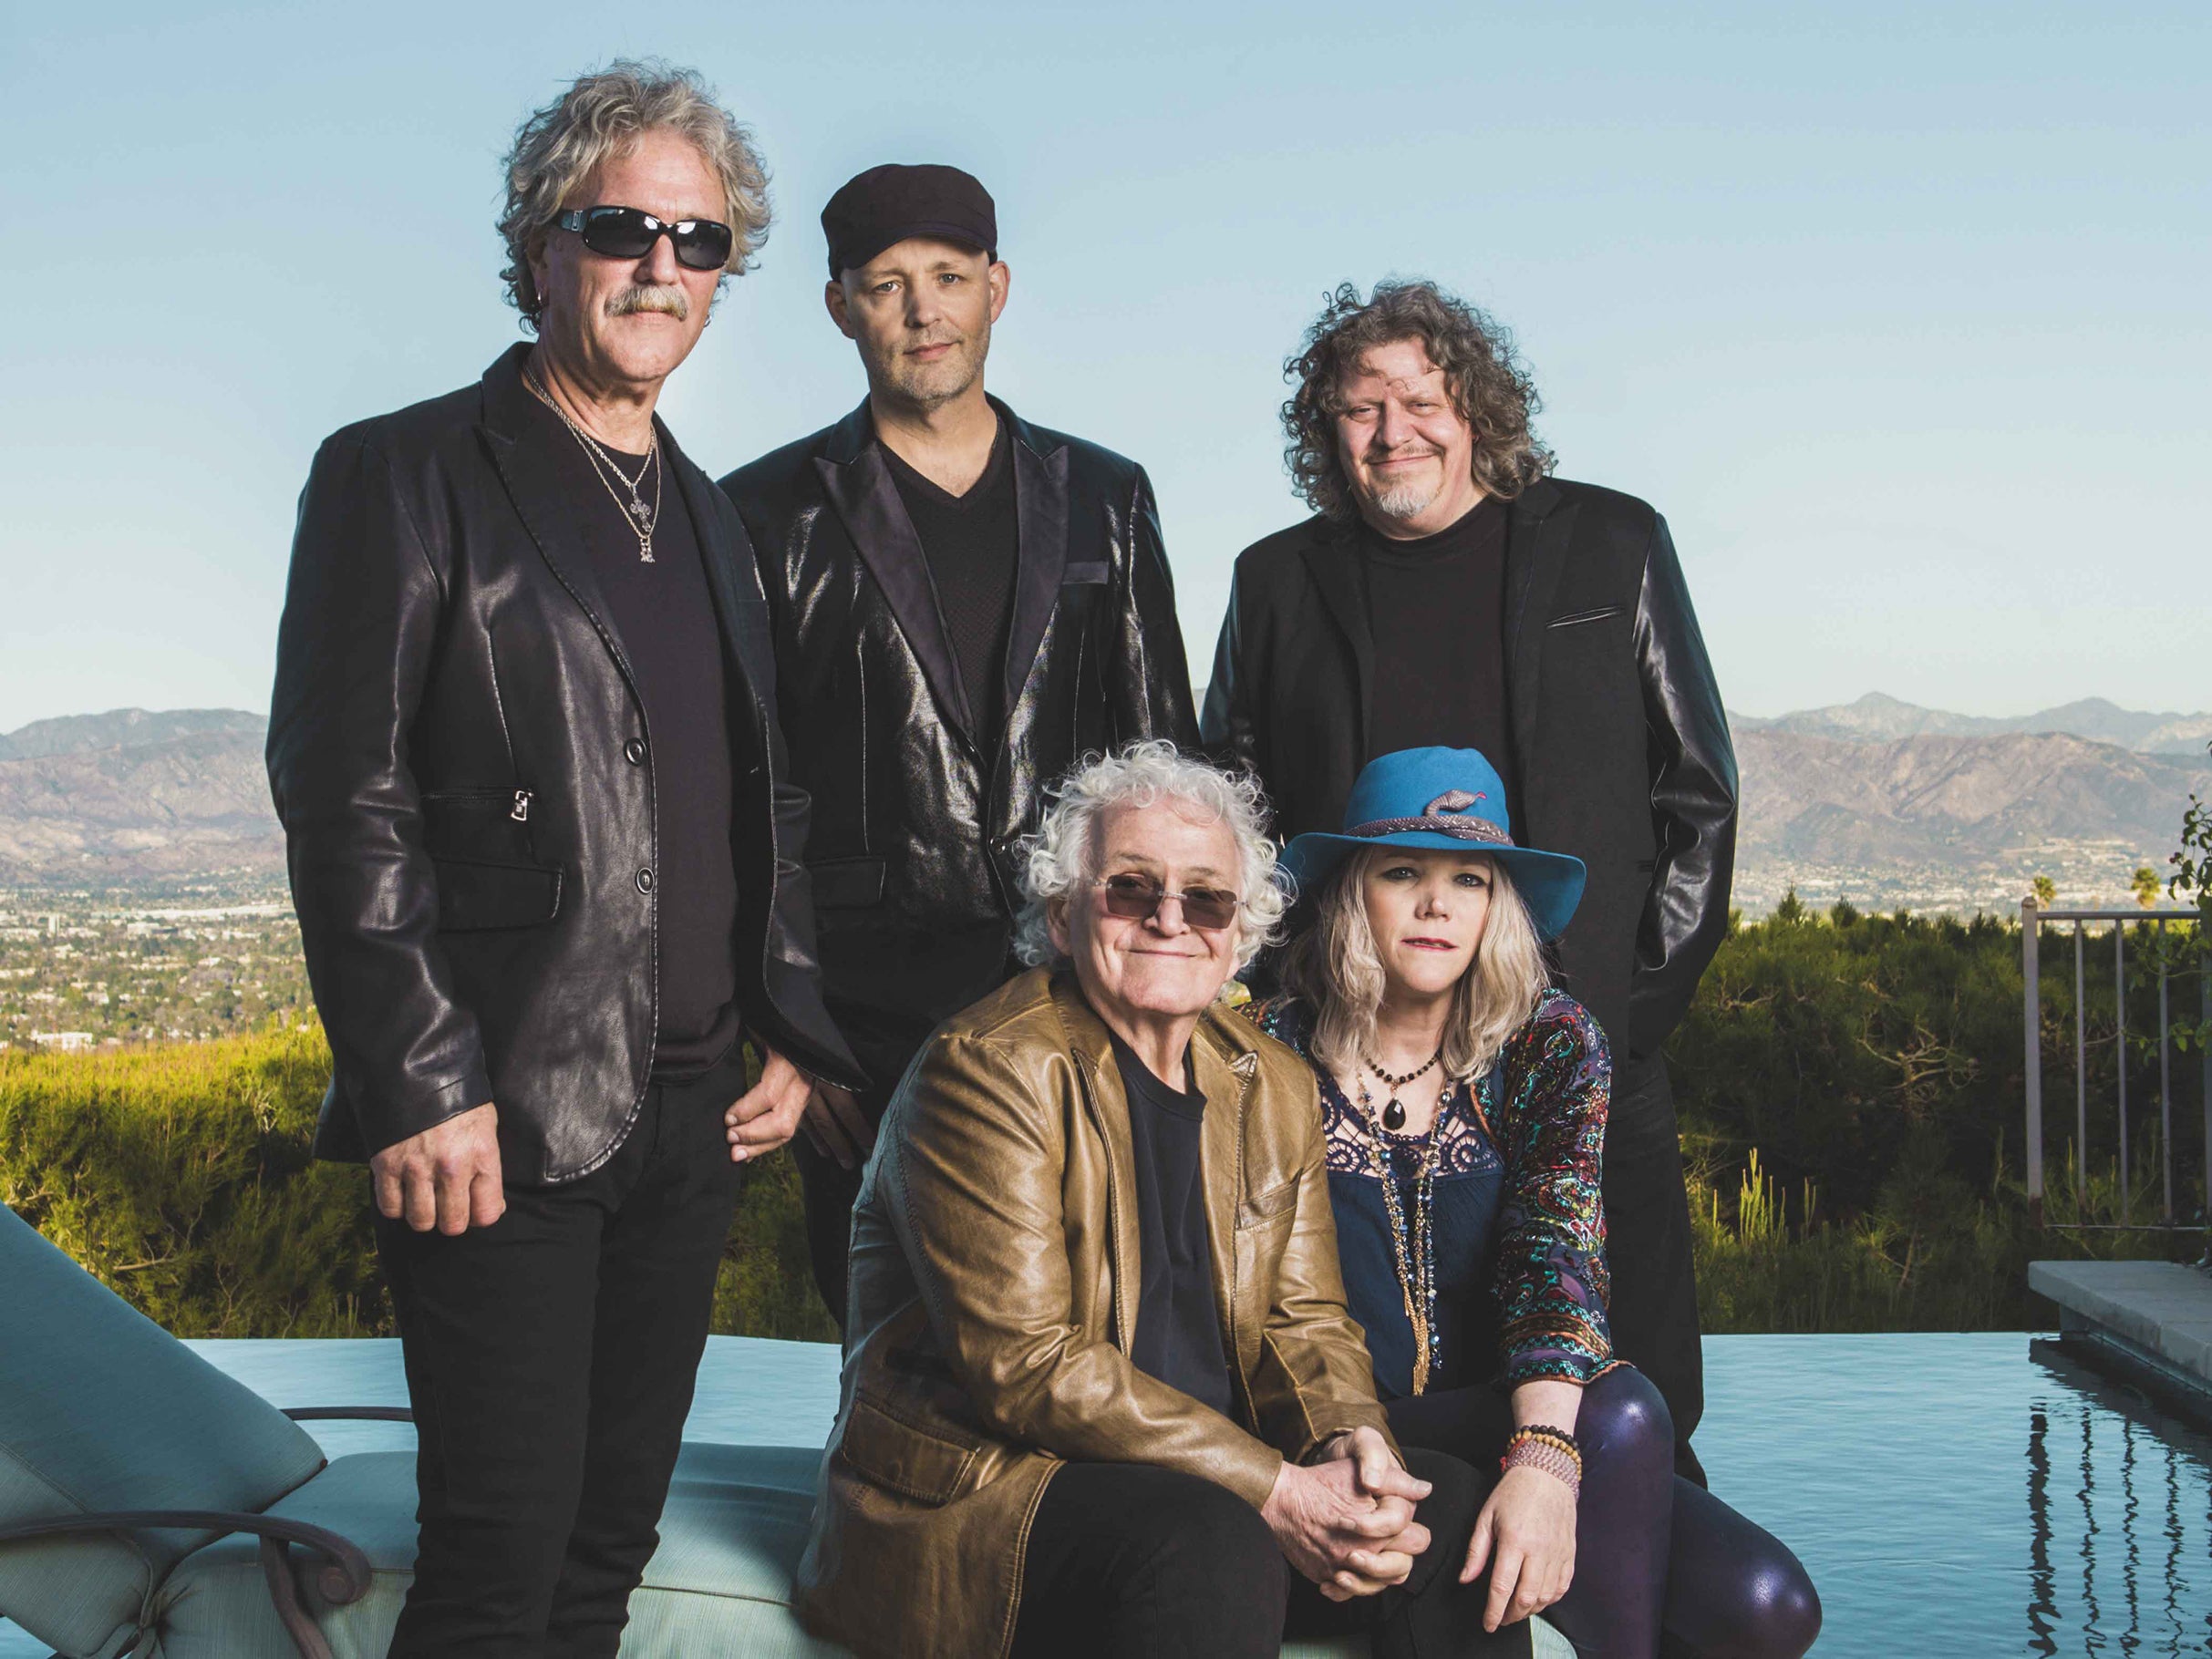 presale code for Jefferson Starship affordable tickets in Niagara Falls